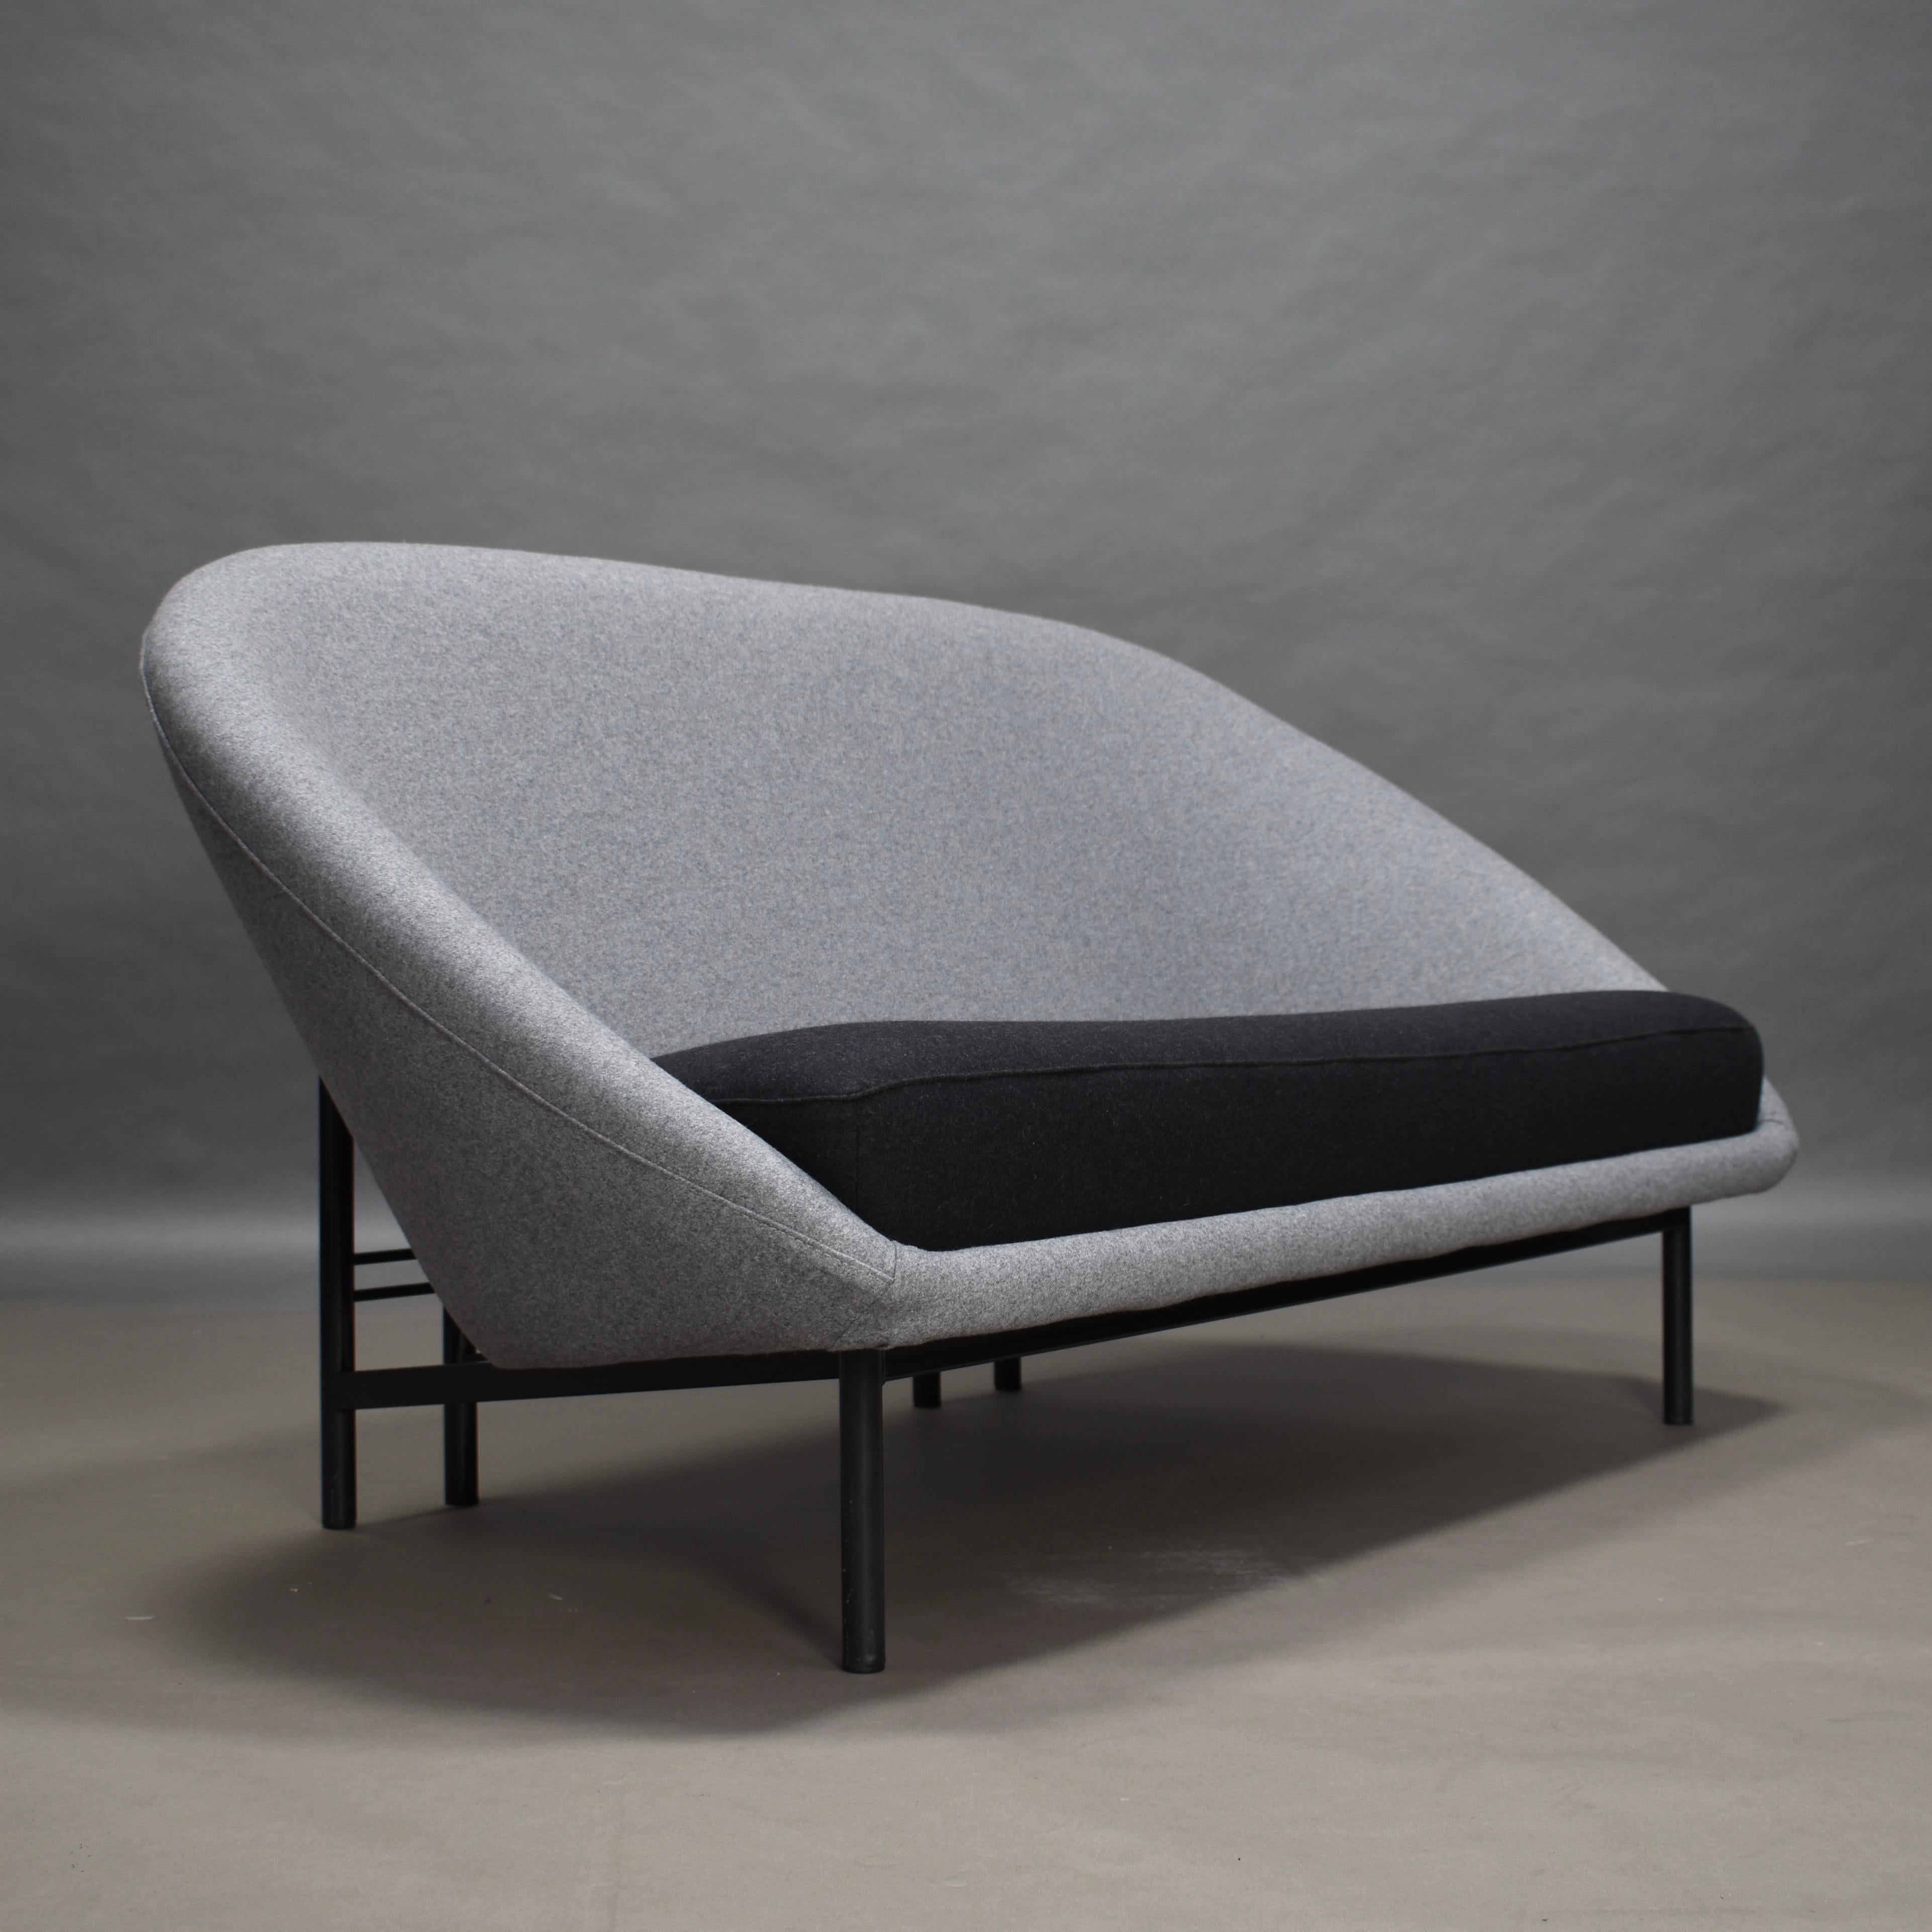 Dutch Theo Ruth f115 Sofa by Artifort, Netherlands, 1958 For Sale